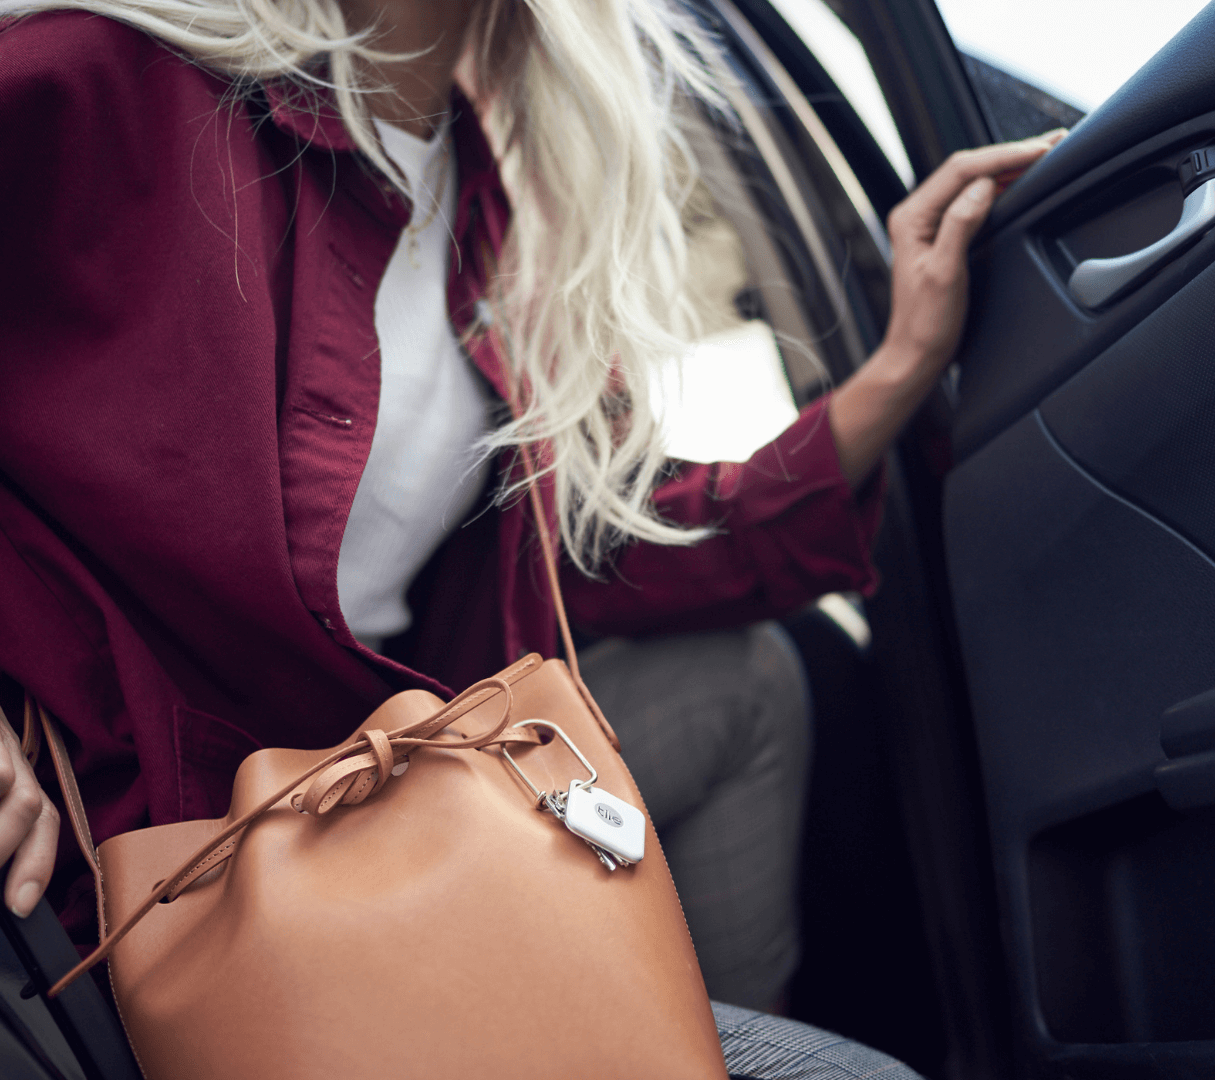 Leave your favorite purse behind at dinner? Use the sleek iota GPS Tracker  to make sure you never lose your valu… | Gps tracker, Favorite purse, Gps  tracking device